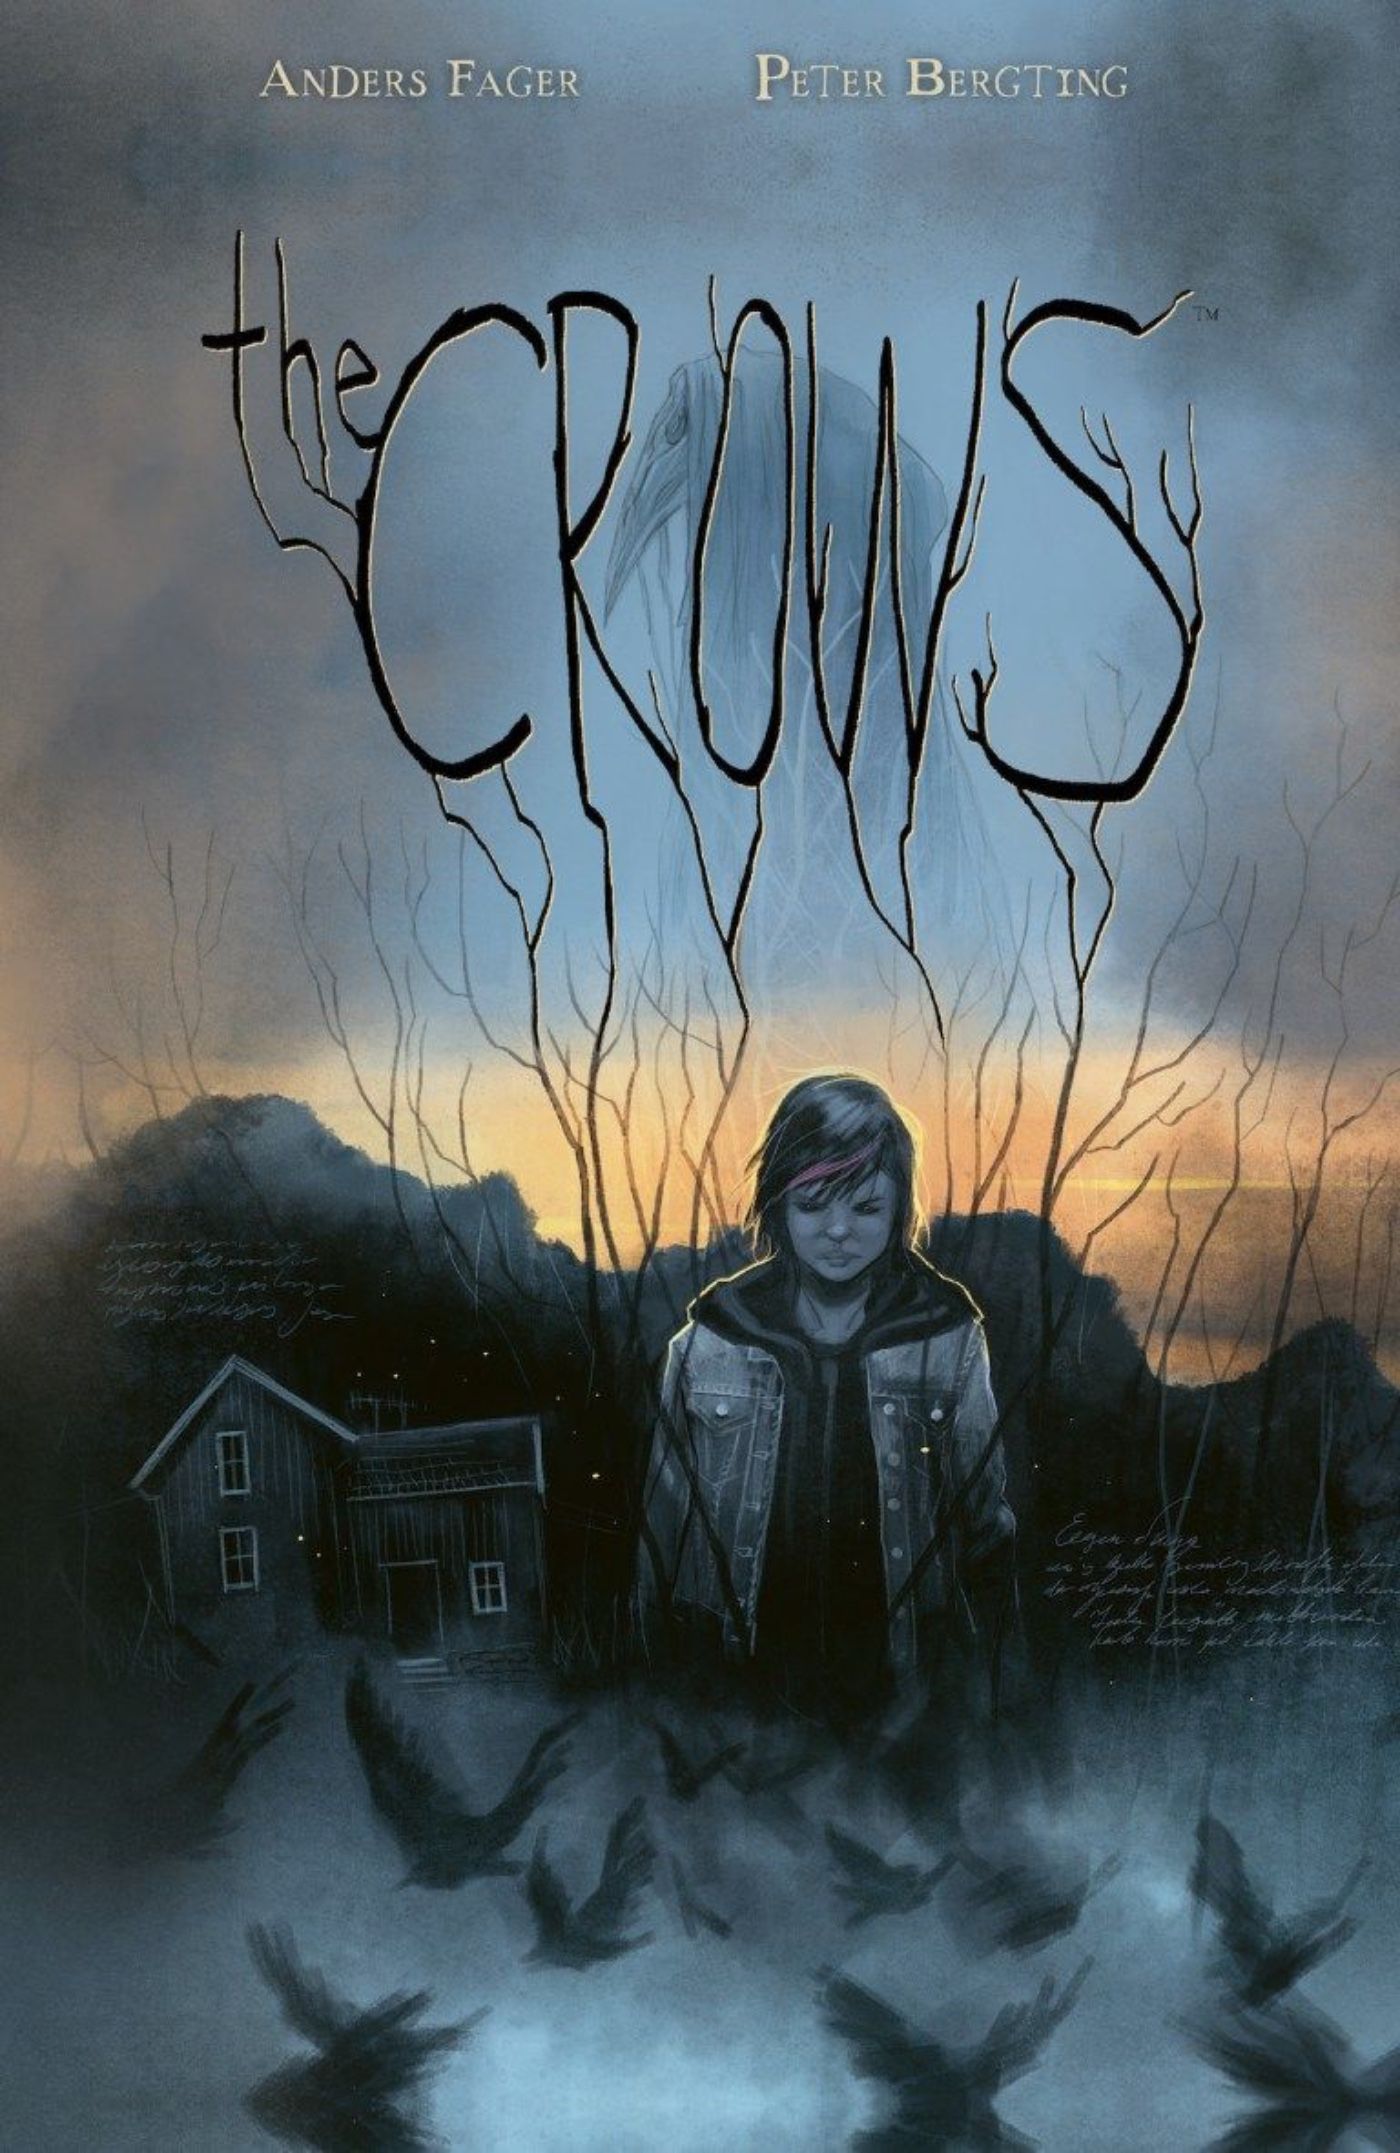 The Crows cover, showing a young woman with her back to an abandoned house